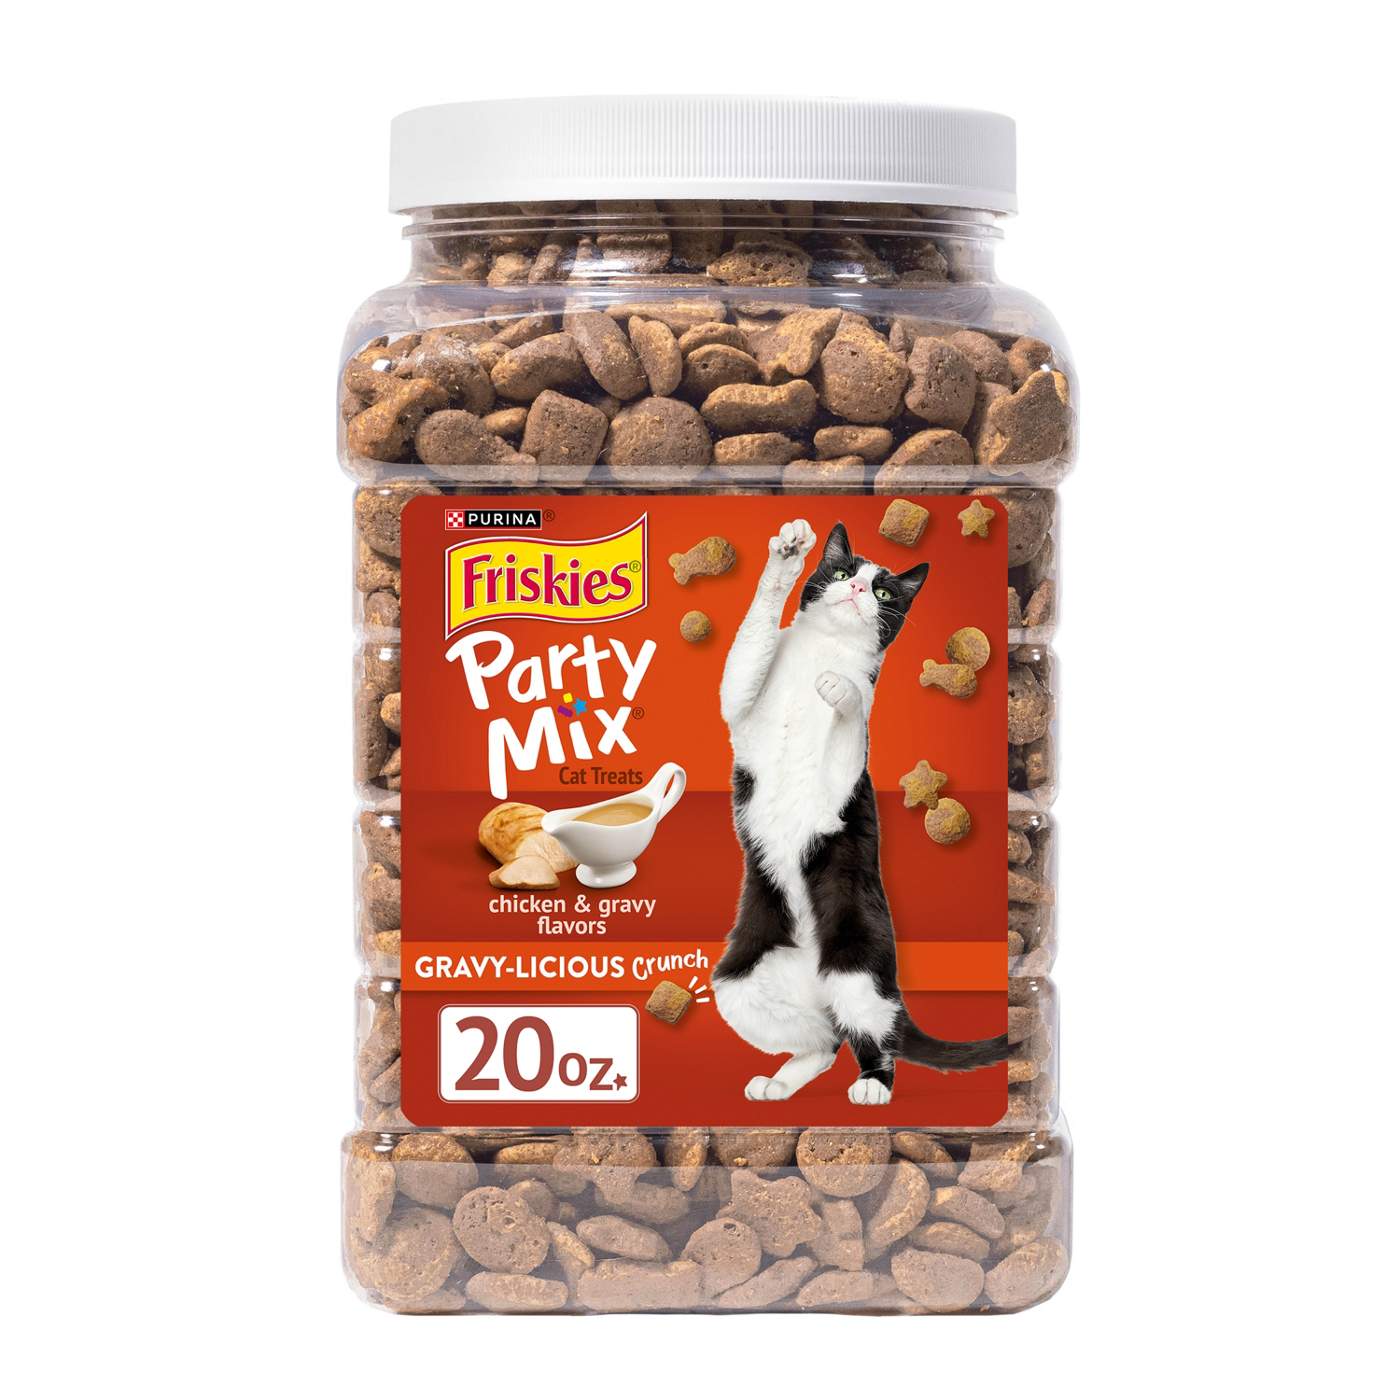 Friskies Purina Friskies Made in USA Facilities Cat Treats, Party Mix Crunch Gravylicious Chicken & Gravy Flavors; image 1 of 6